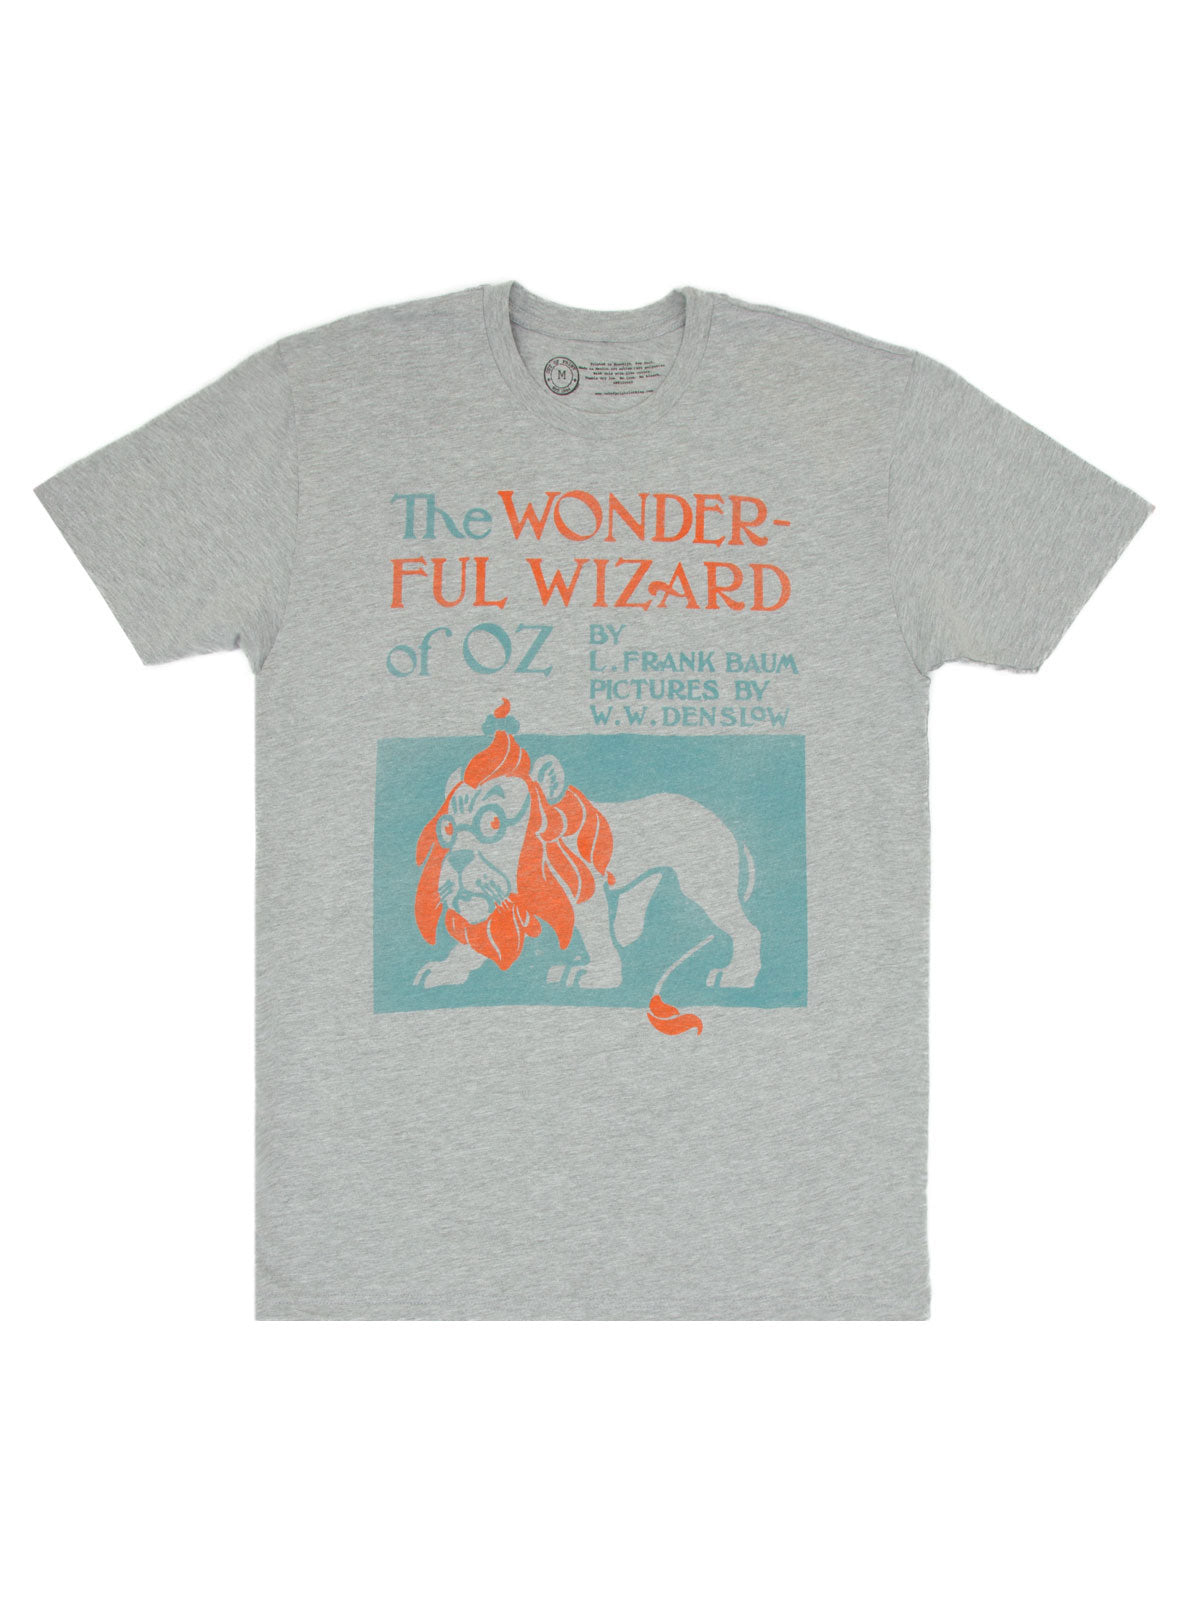 The Wonderful Wizard of Oz men\'s t-shirt — Out of Print